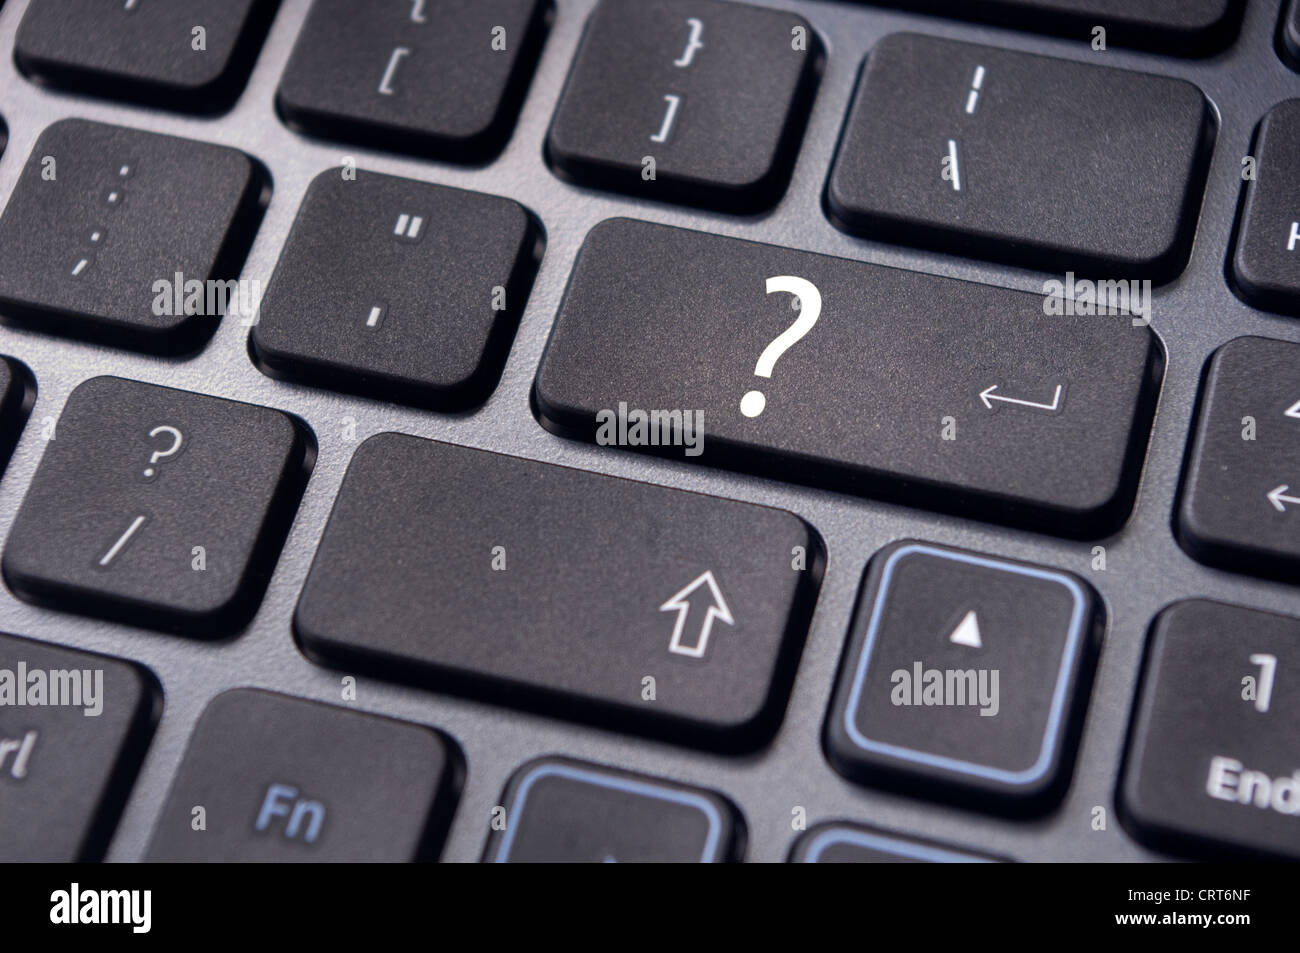 concepts of questions or computer errors, with a question on enter key of keyboard. Stock Photo